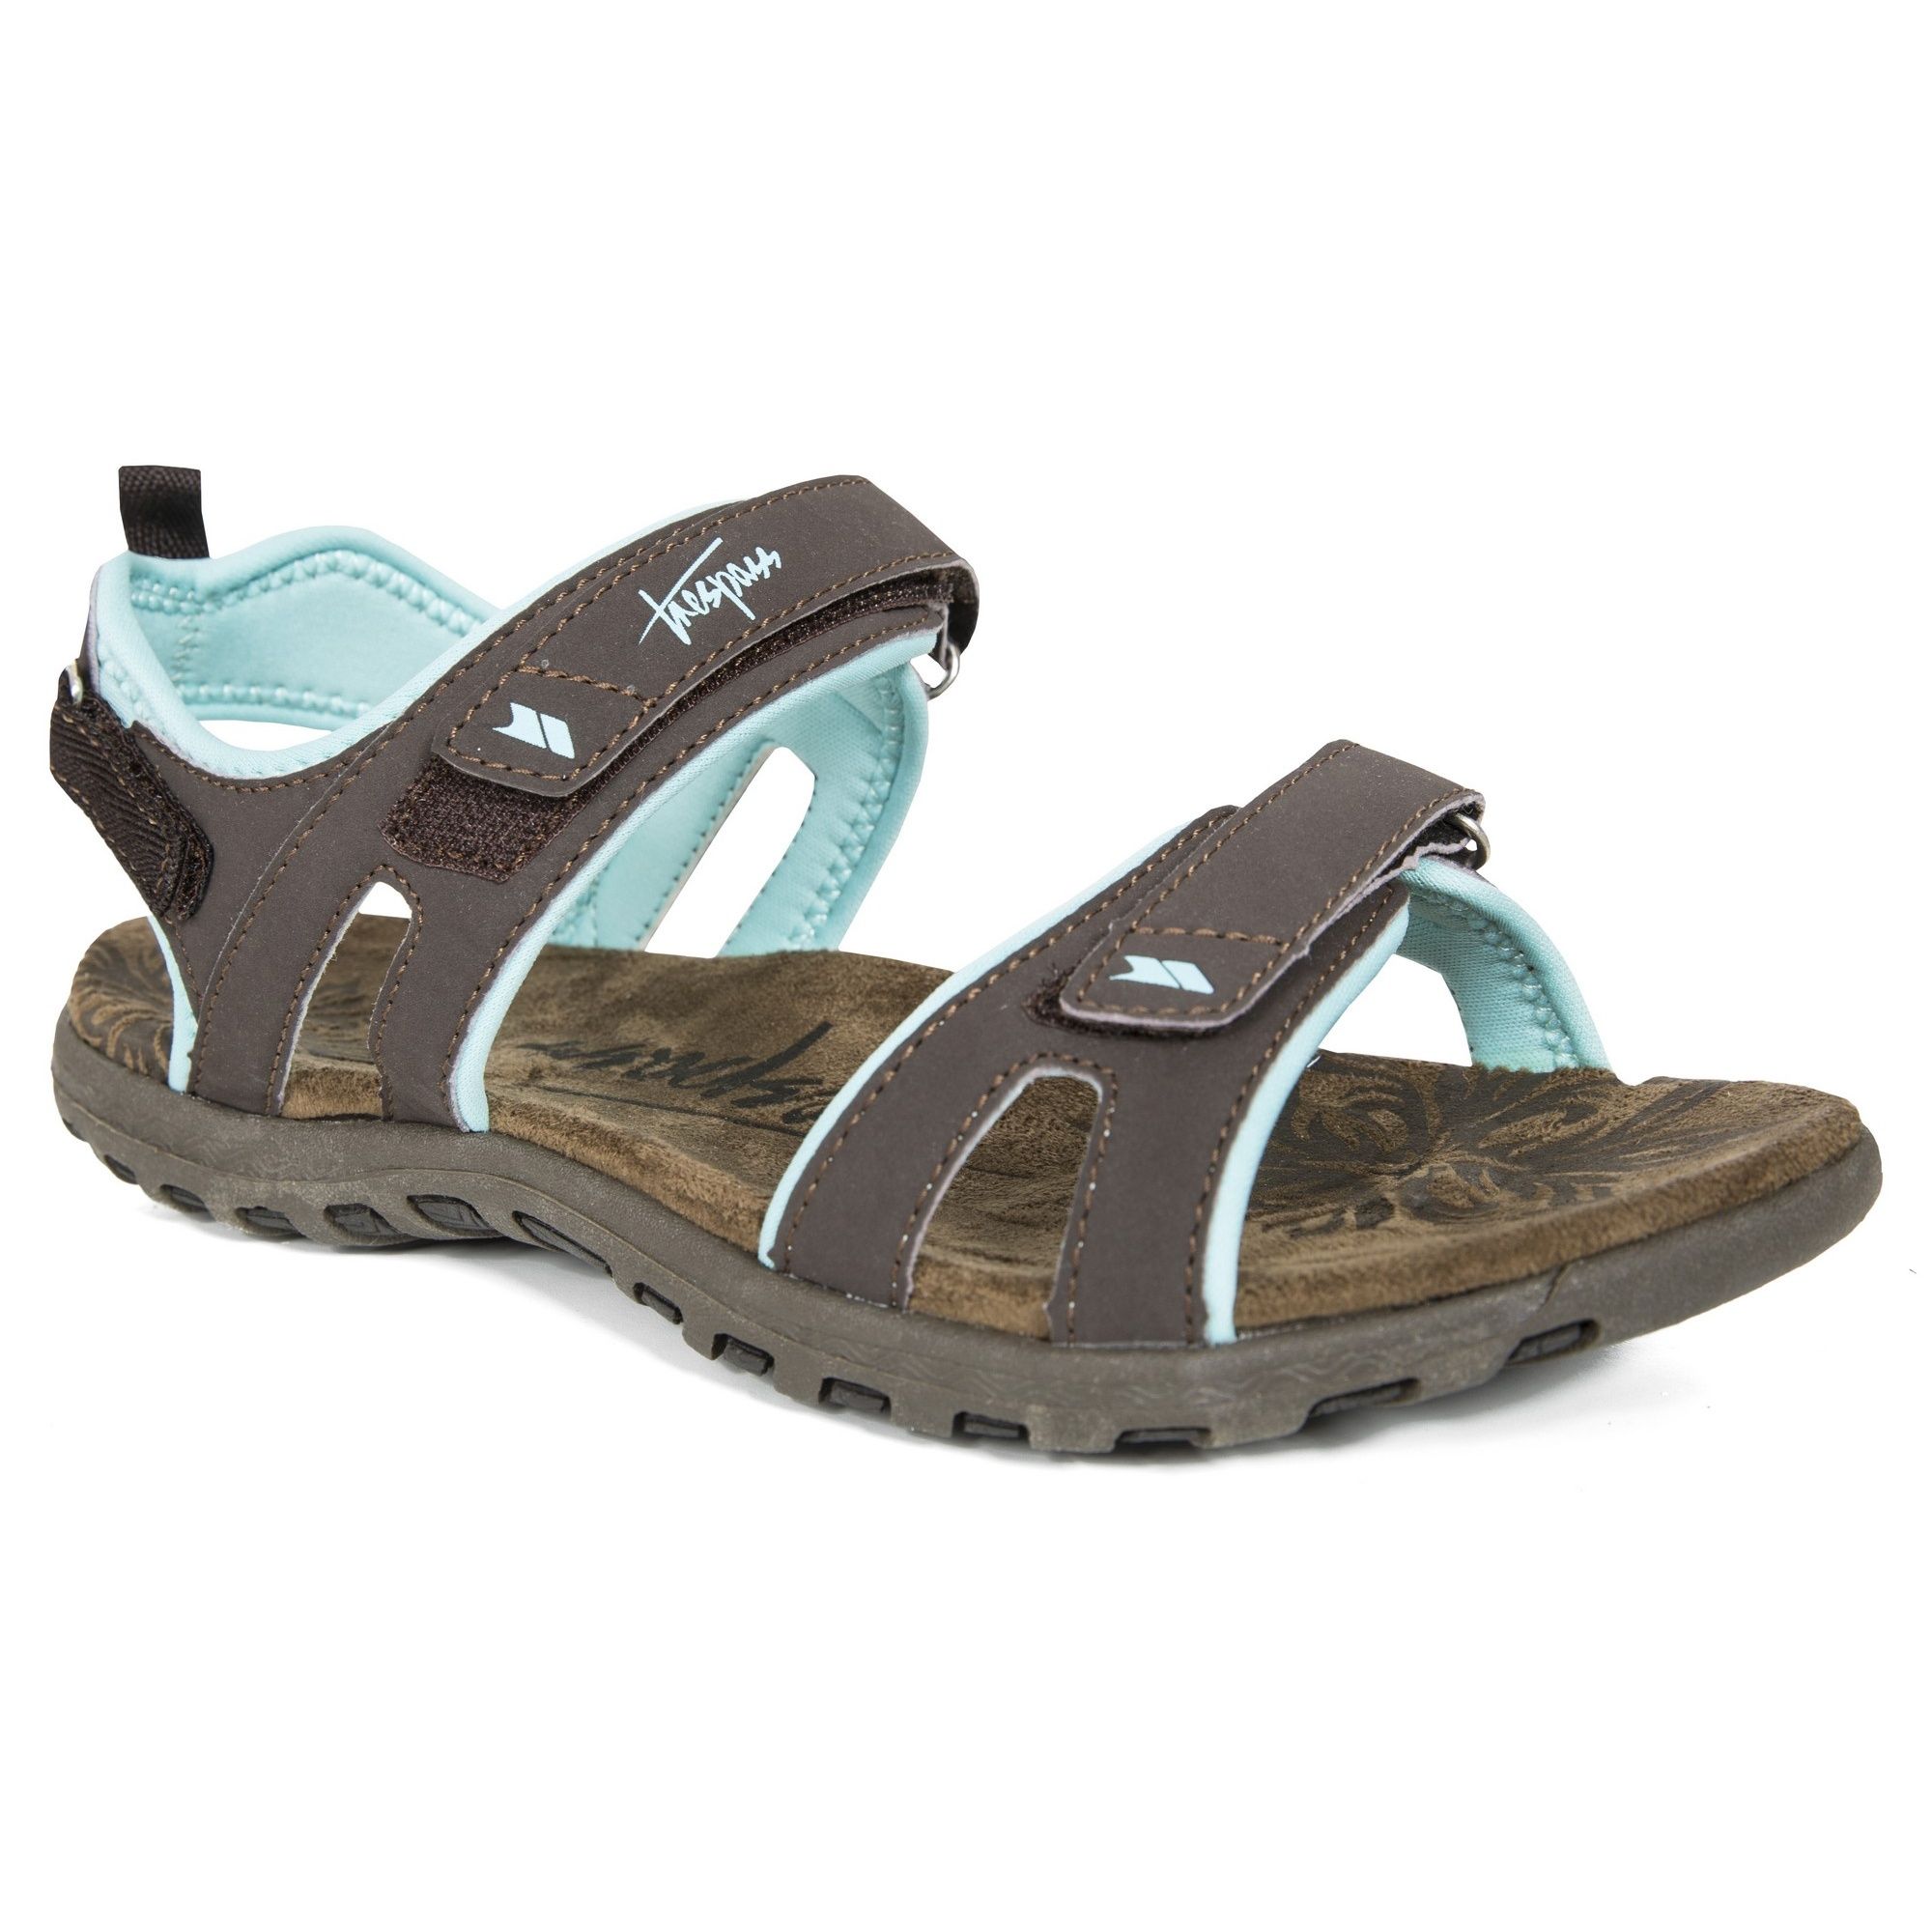 Active sandal. Fully lined upper with cushioning. Positive fit 3-point adjustment. Cushioned and moulded footbed. Durable traction outsole. Upper: PU/Textile, Midsole: Molded EVA, Outsole: TPR.